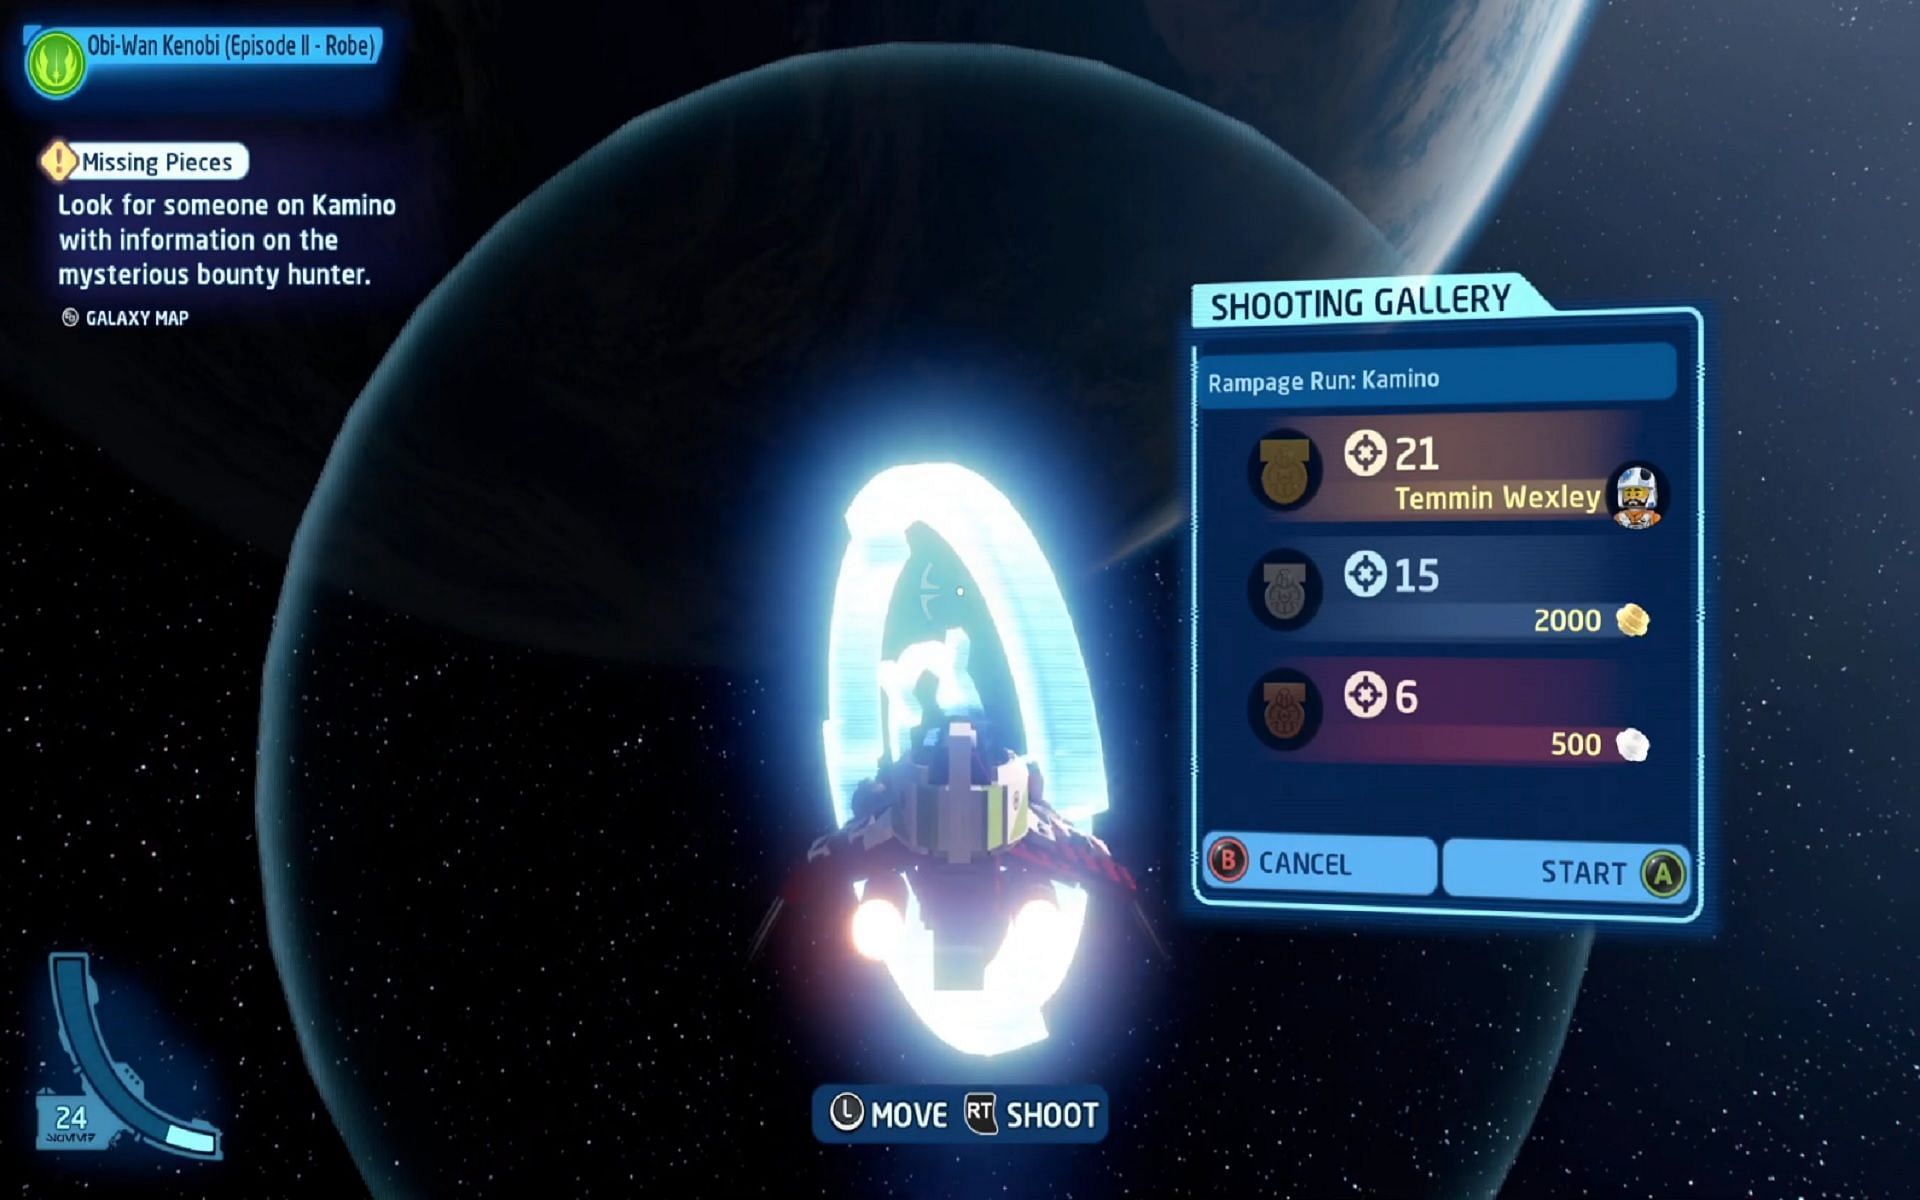 A challenge accessible in Kamino Space (Image via Bry_Fo LetsPlay/YouTube)